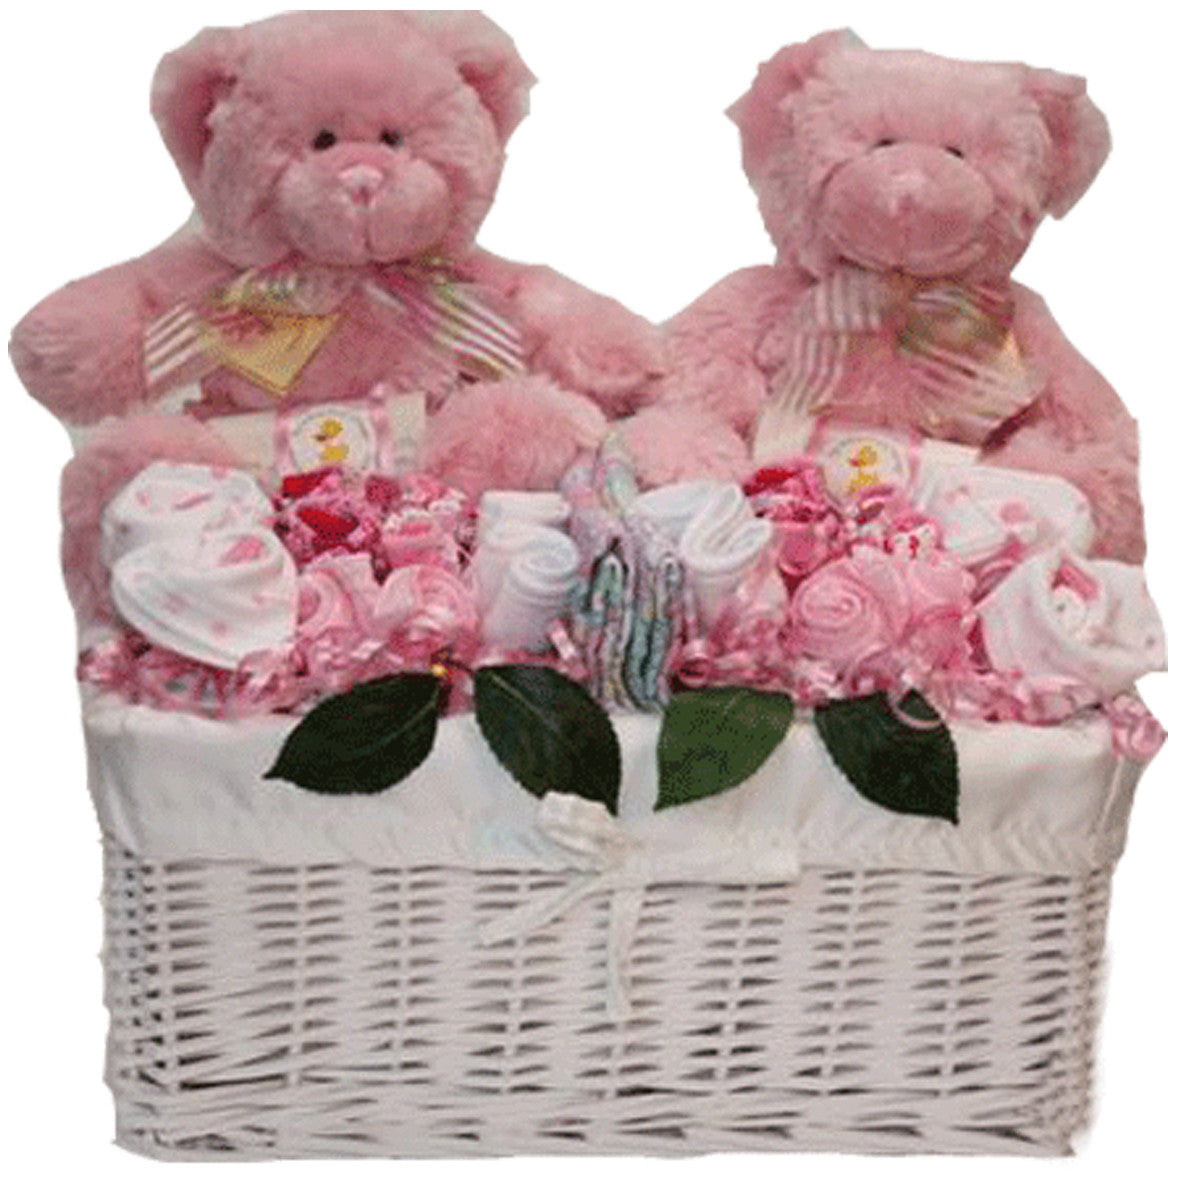 twin baby girls gift basket pink teddy bears and baby clothing